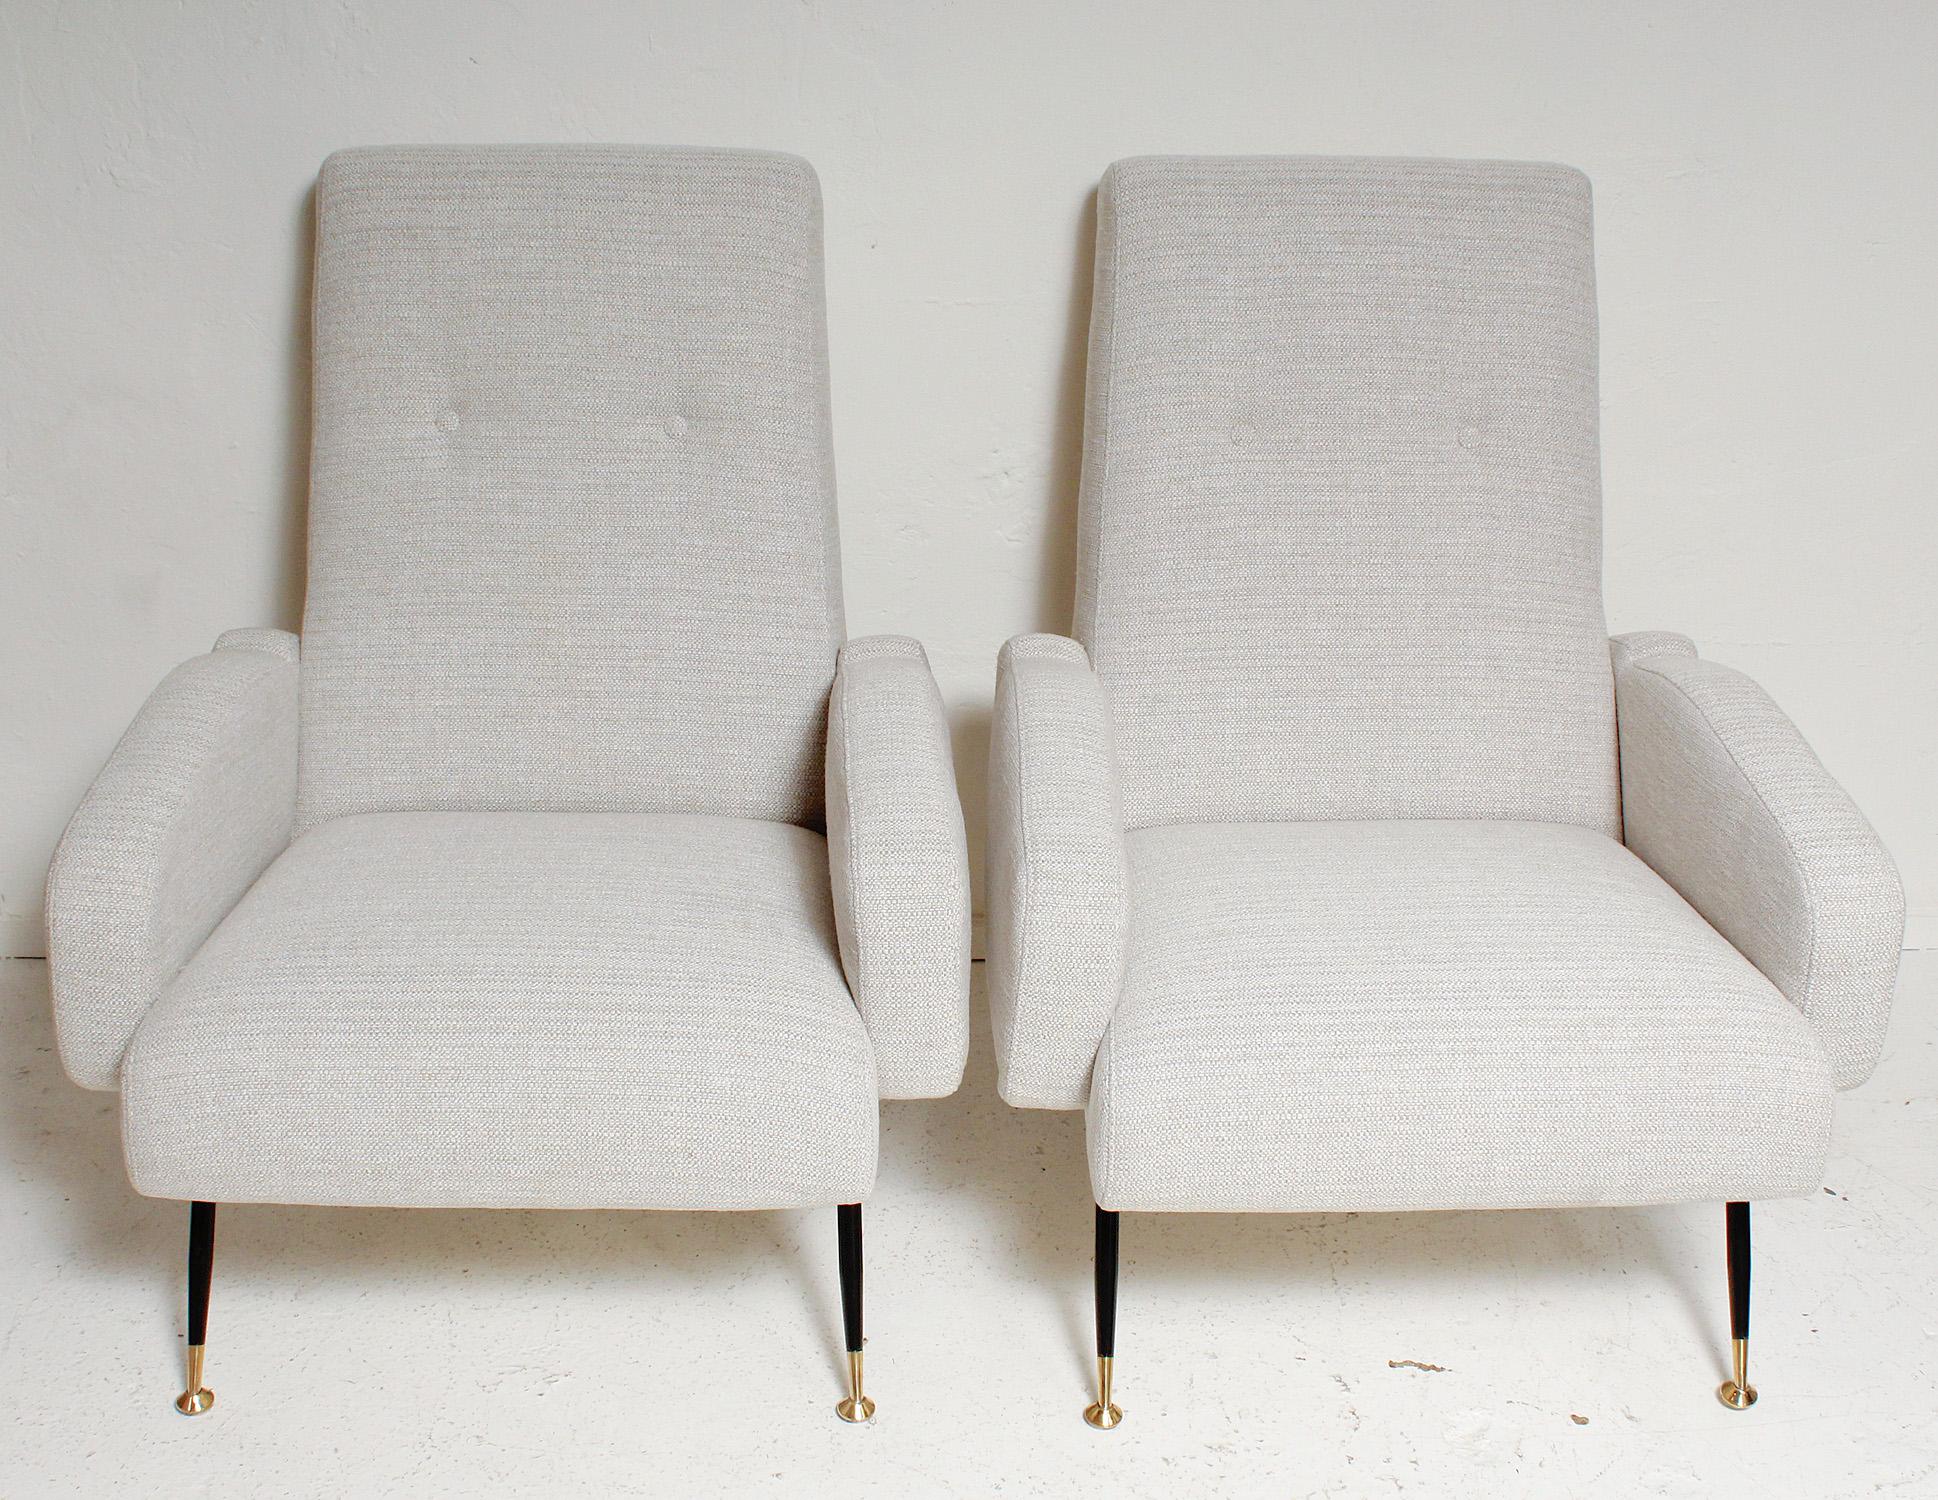 Oh-so-sexy pair of 1950s Italian lounge chairs, fully restored with all new foam, palest grey and cream upholstery, and freshly polished brass details.